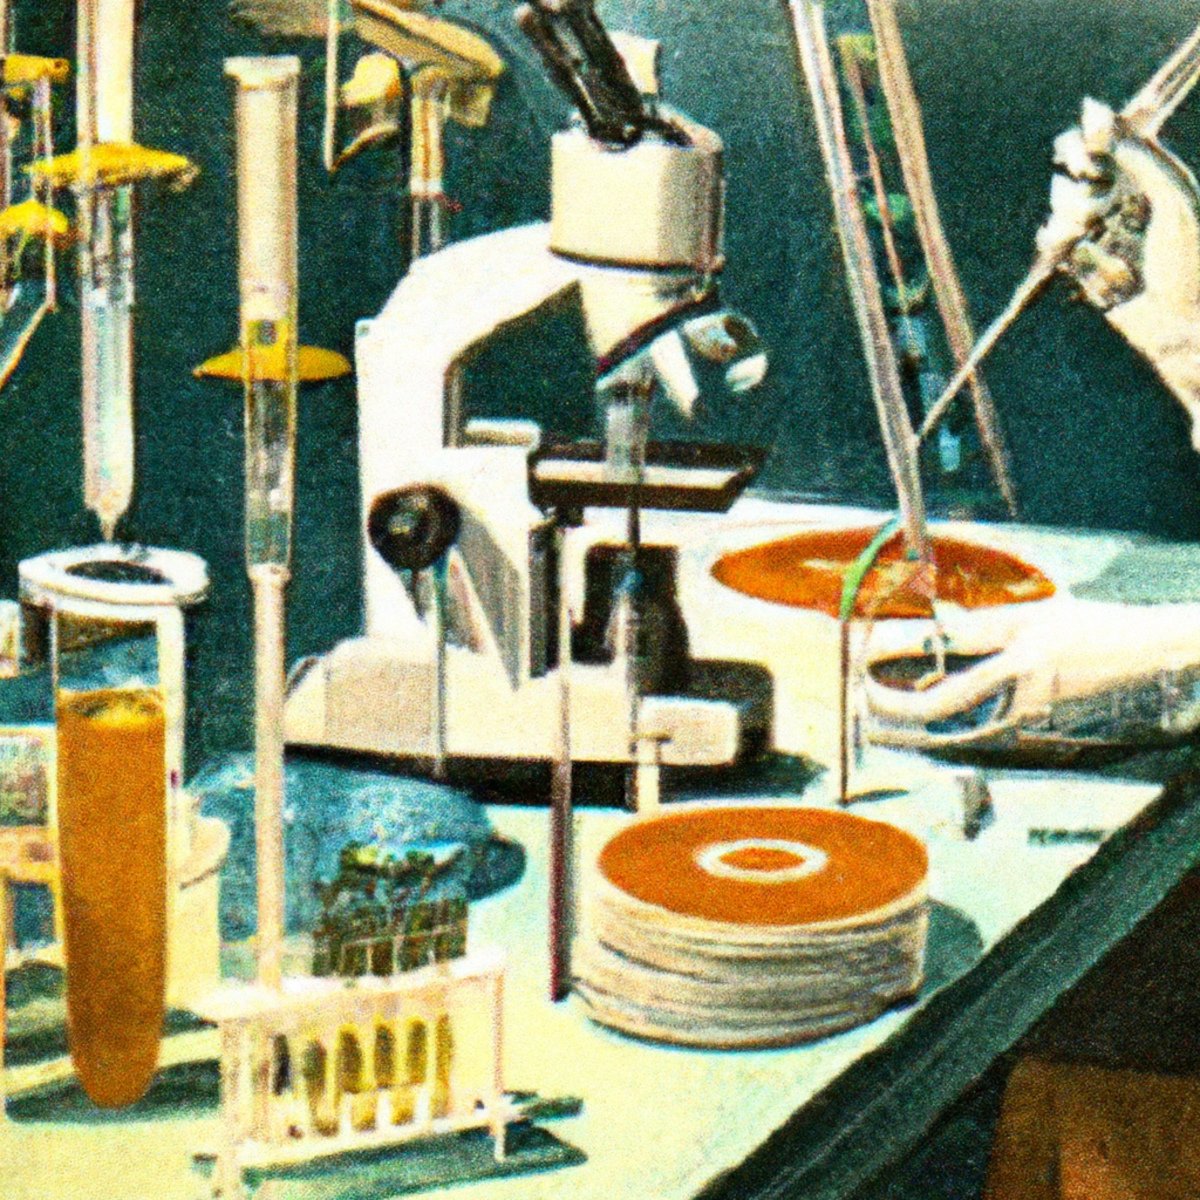 Well-equipped laboratory with scientific instruments neatly arranged, reflecting meticulous research on Erdheim-Chester Disease.